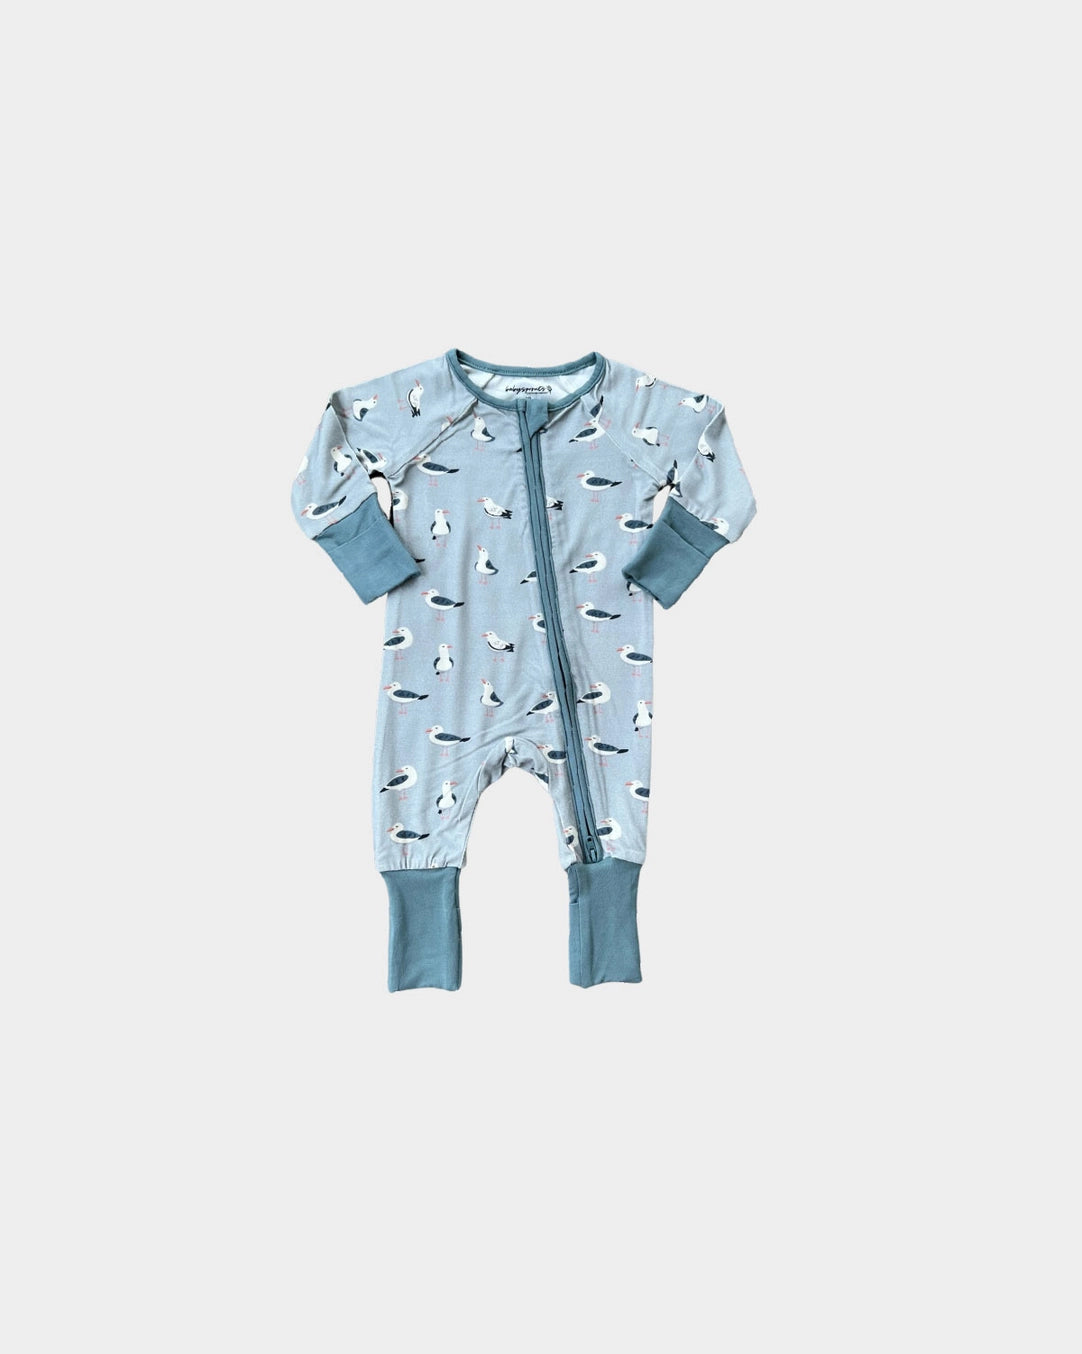 Babysprouts infant footless romper